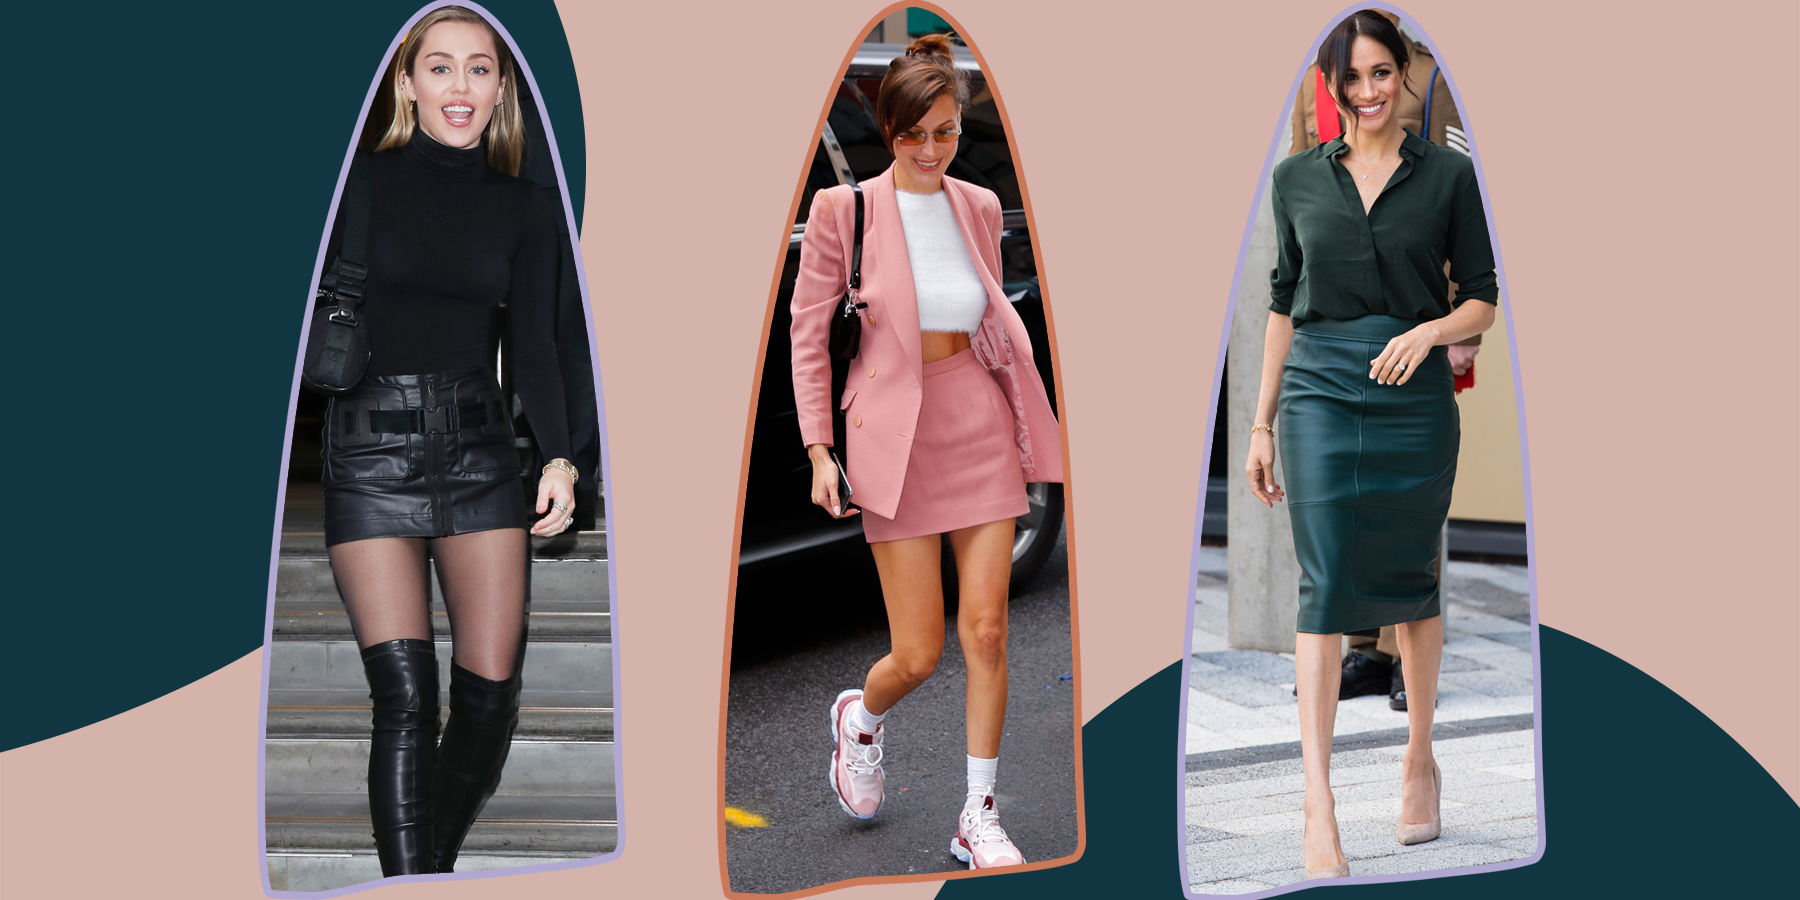 10 Skirt Outfits To Try What To Wear With SkirtsHelloGiggles picture